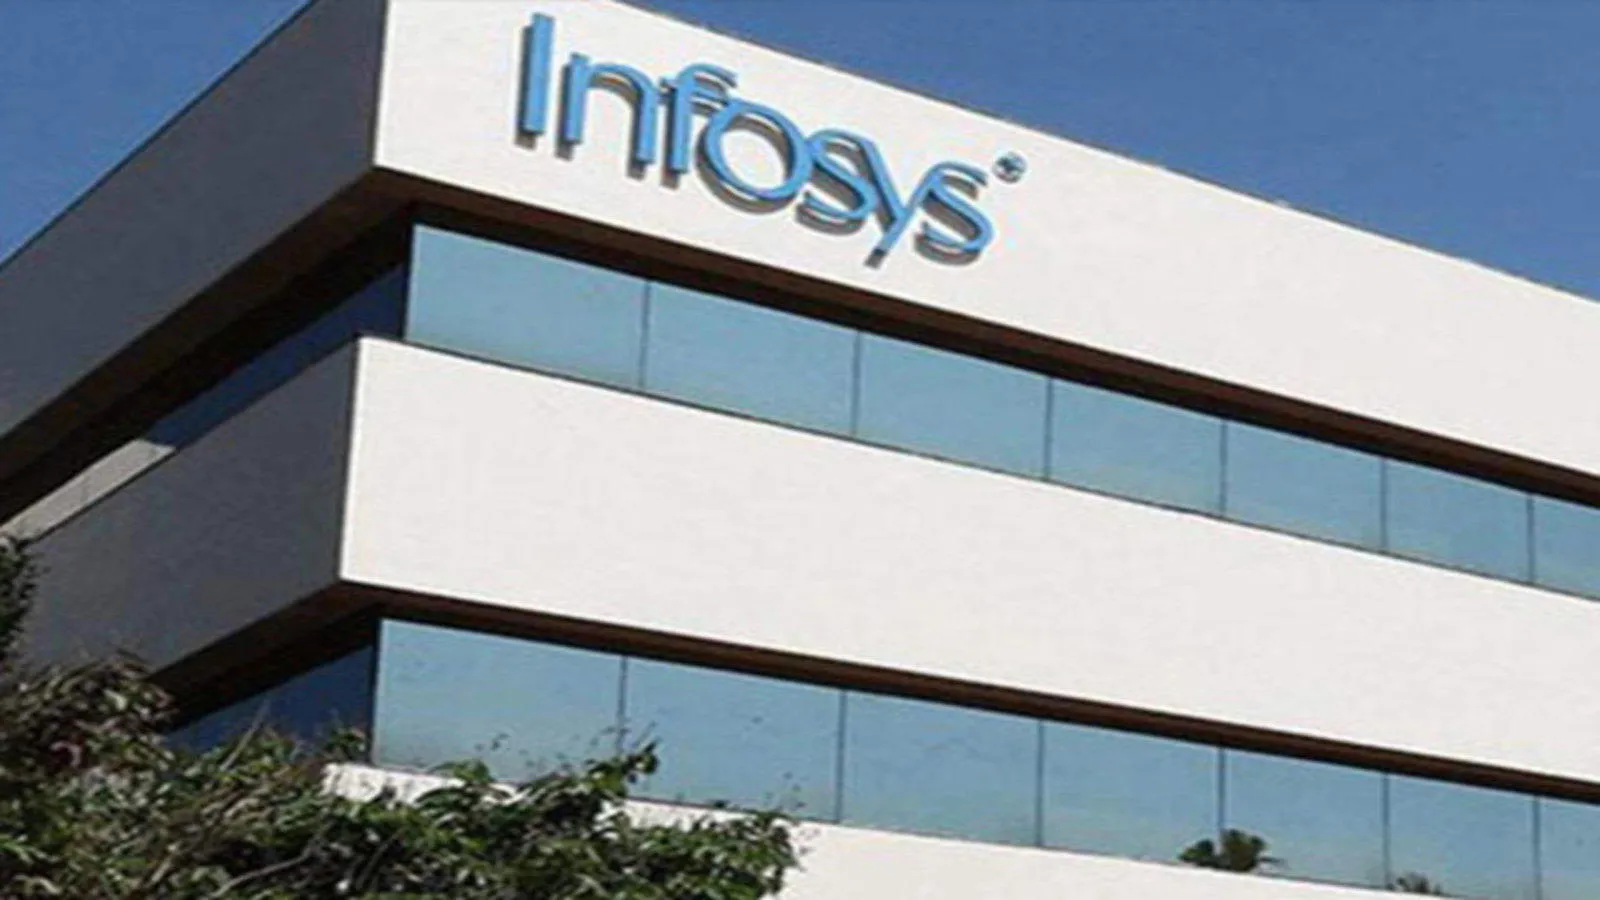 Infosys Q1 preview: Expect strong revenue growth & deal momentum; all eyes on upgrade in FY22 guidance - The Economic Times Video | ET Now